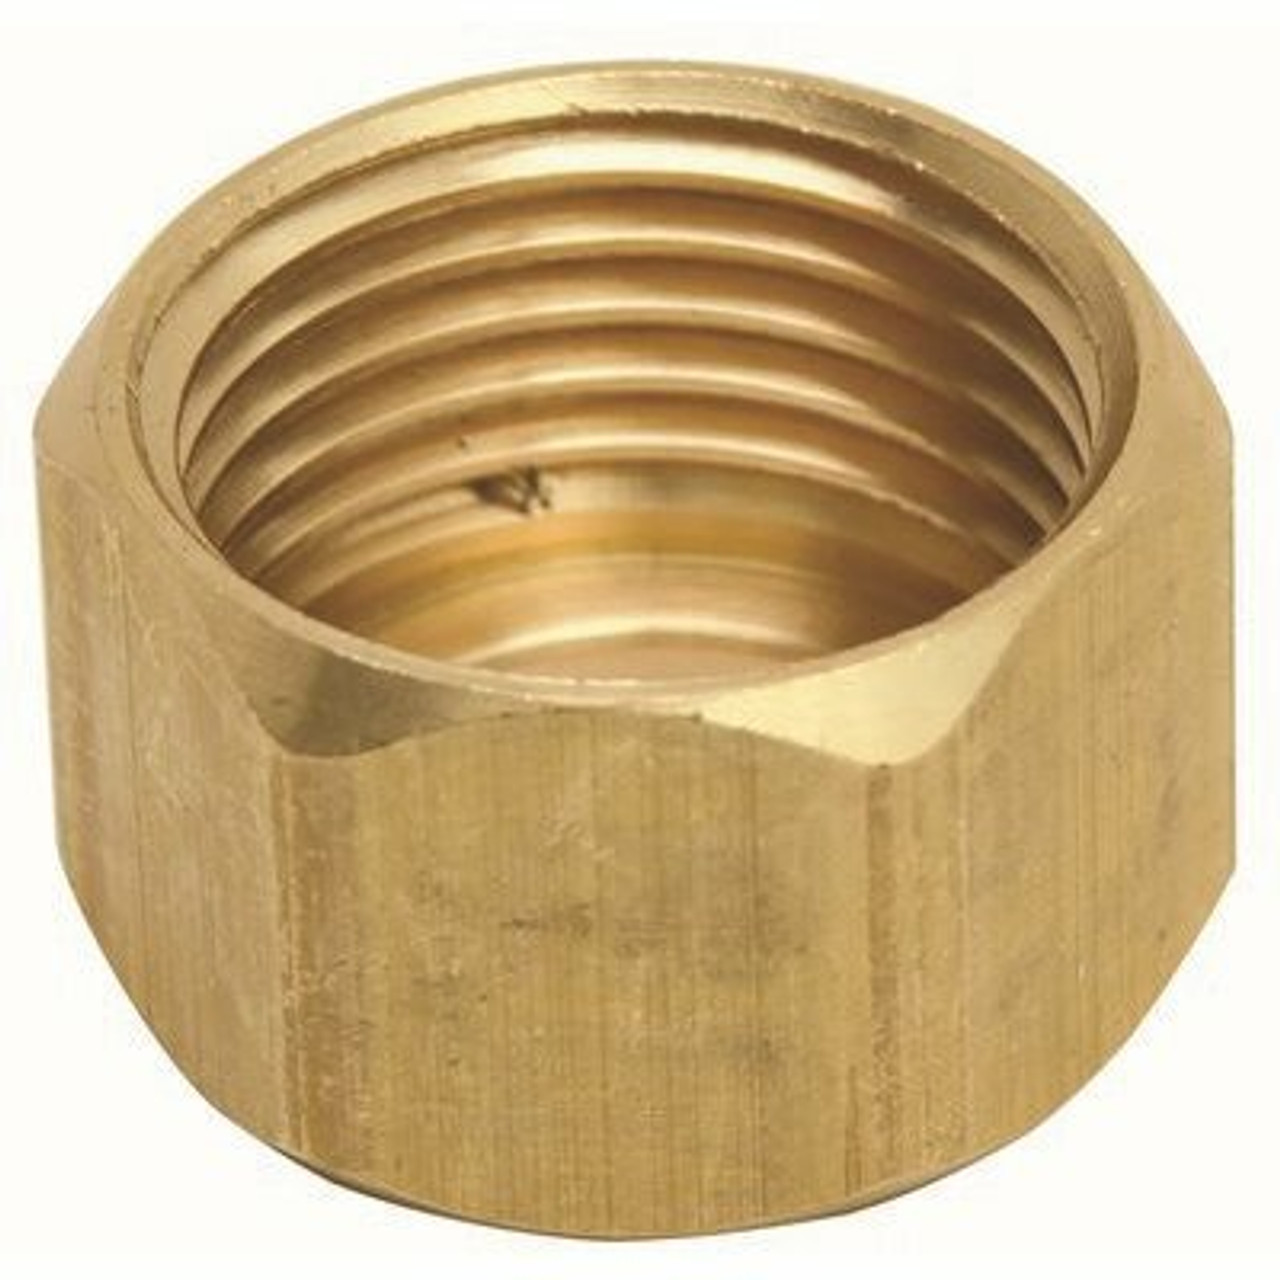 Proplus Faucet Coupling Nut, Solid Brass